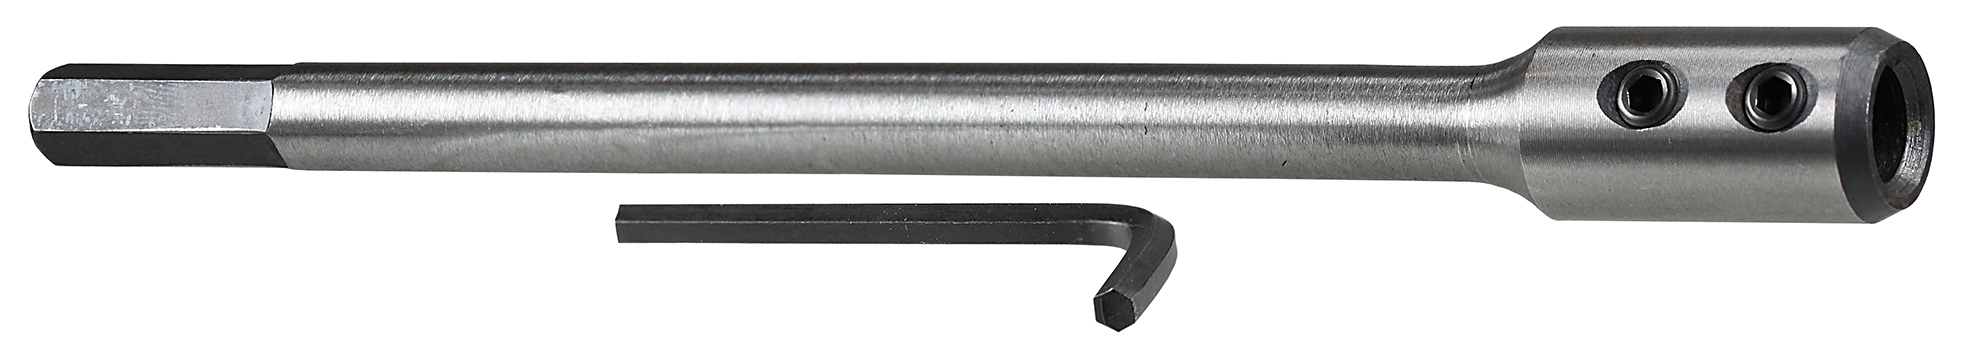 Extension, 7/16 in. Size, 24 in. length, Steel material